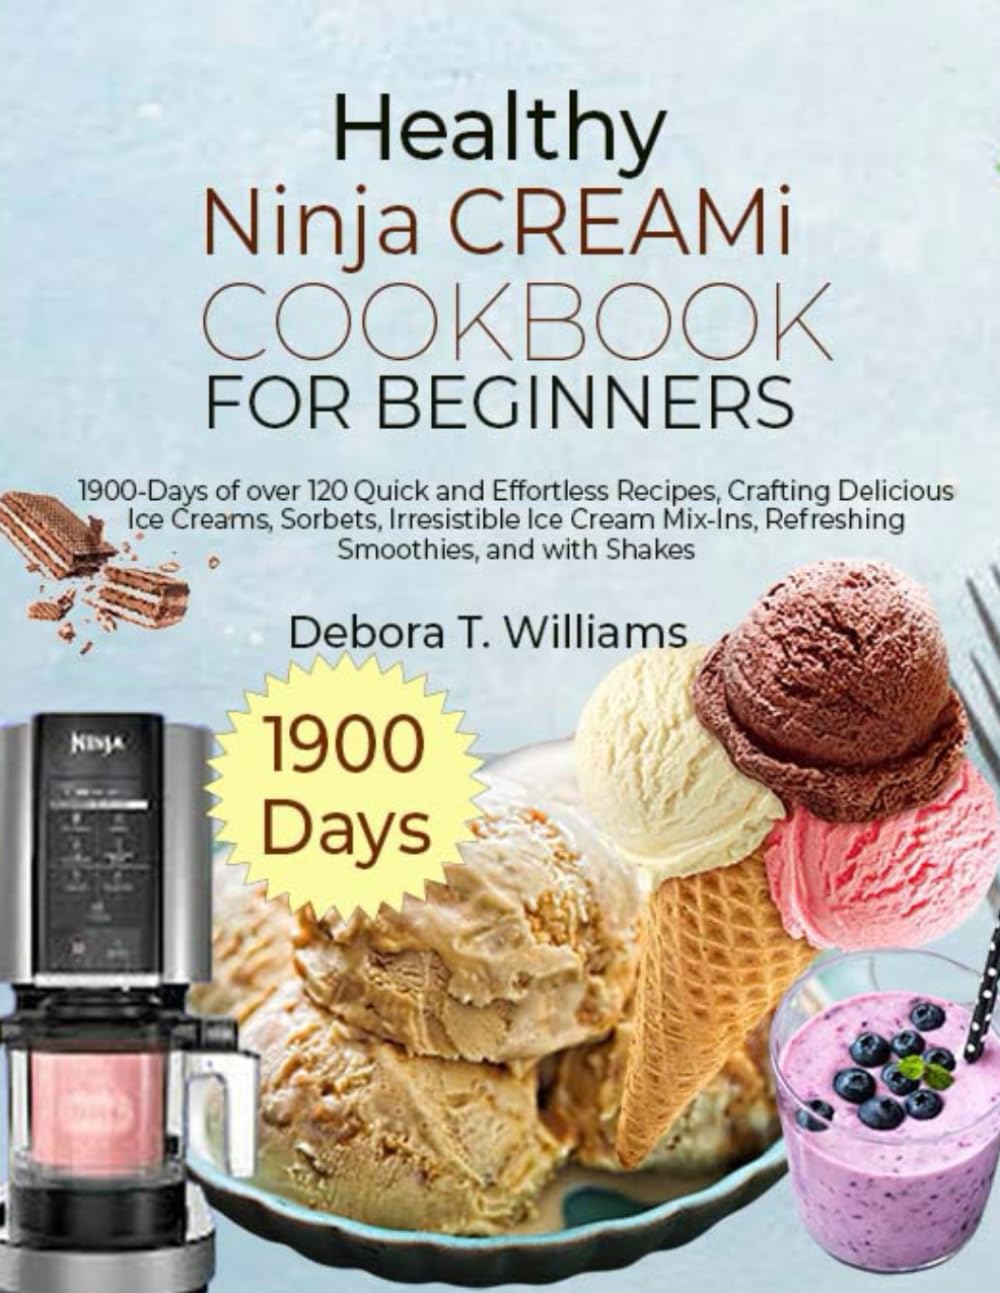 Healthy Ninja CREAMi Cookbook for Beginners: 1900-Days of over 120 Quick and Effortless Recipes, Crafting Delicious Ice Creams, Sorbets, Irresistible Ice Cream Mix-Ins, Refreshing Smoothies, and with